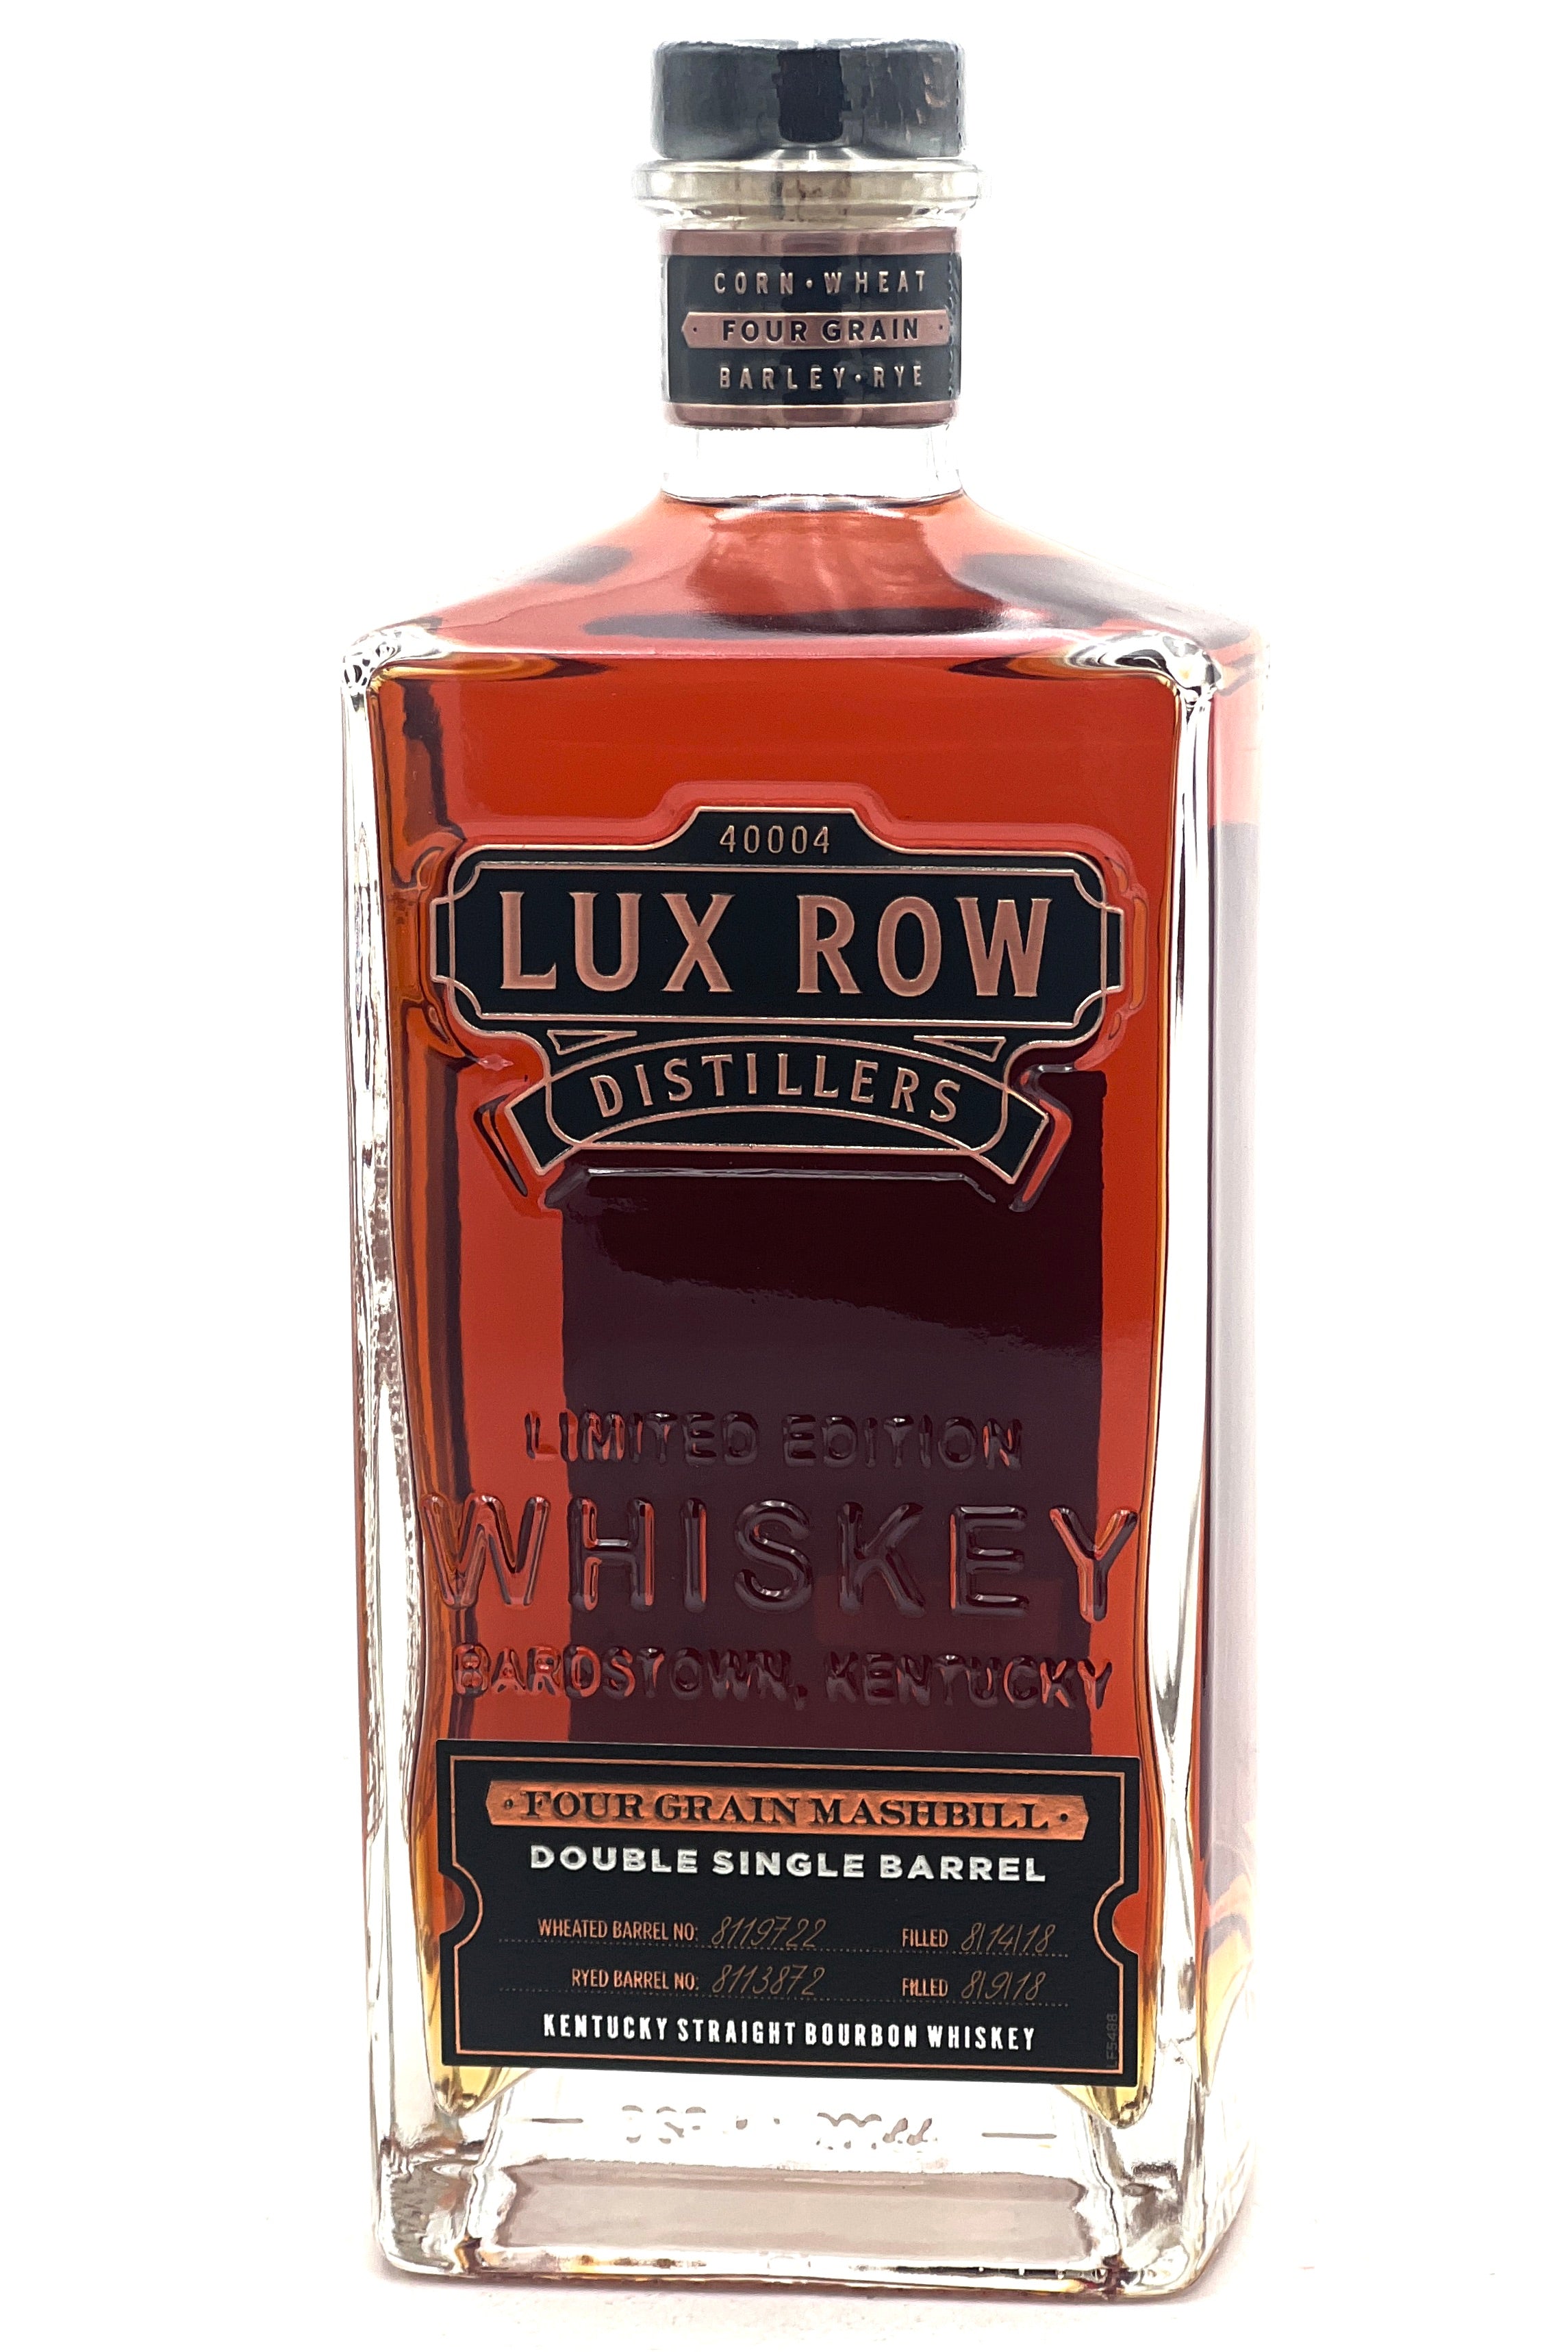 Cocktails - Lux Row Distillers